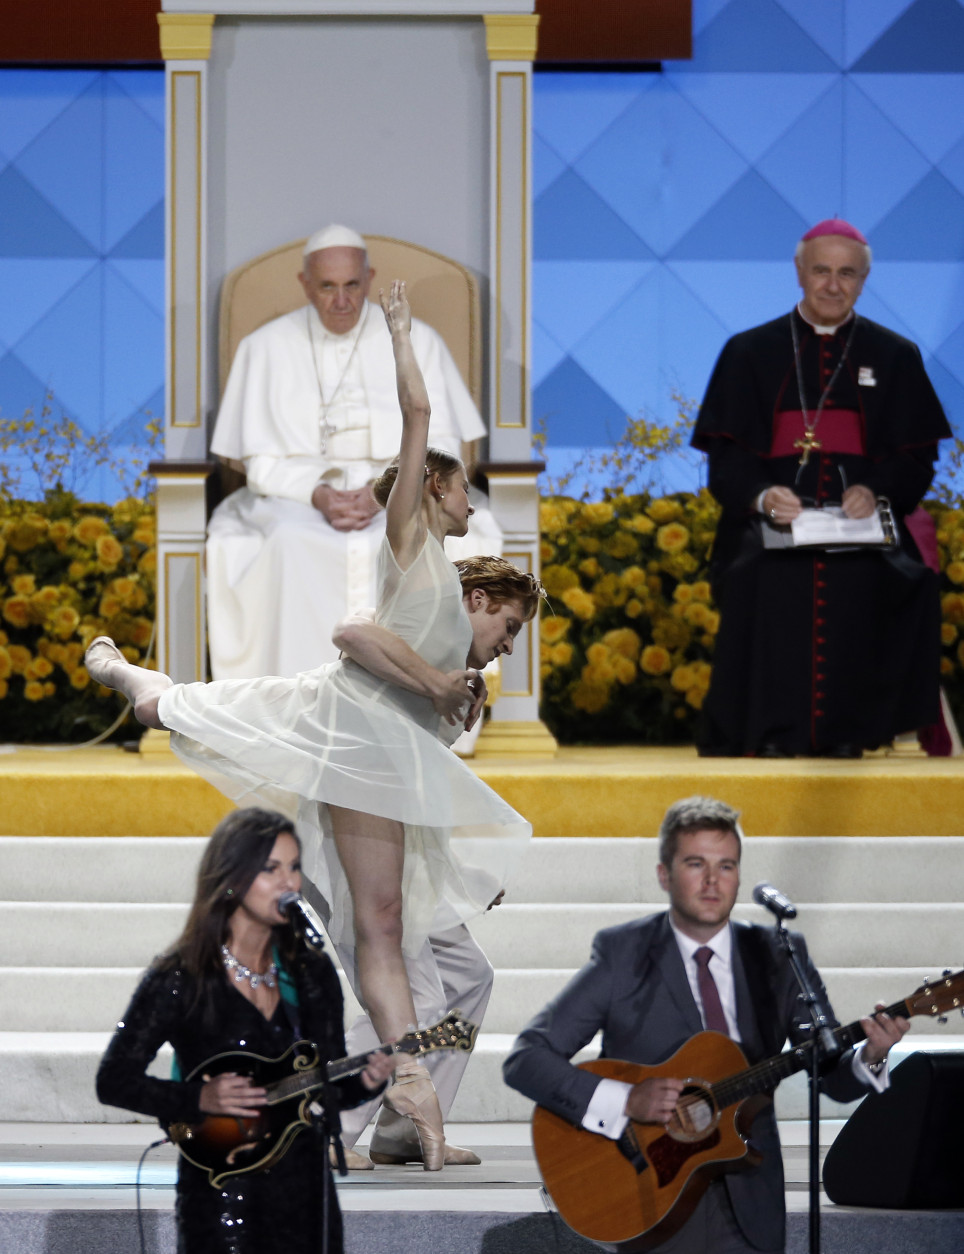 Pope Francis attends a performance by Marie Miller and the Pennsylvania Ballet at the Festival of Families, Saturday, Sept. 26, 2015, in Philadelphia. (AP Photo/Matt Slocum)